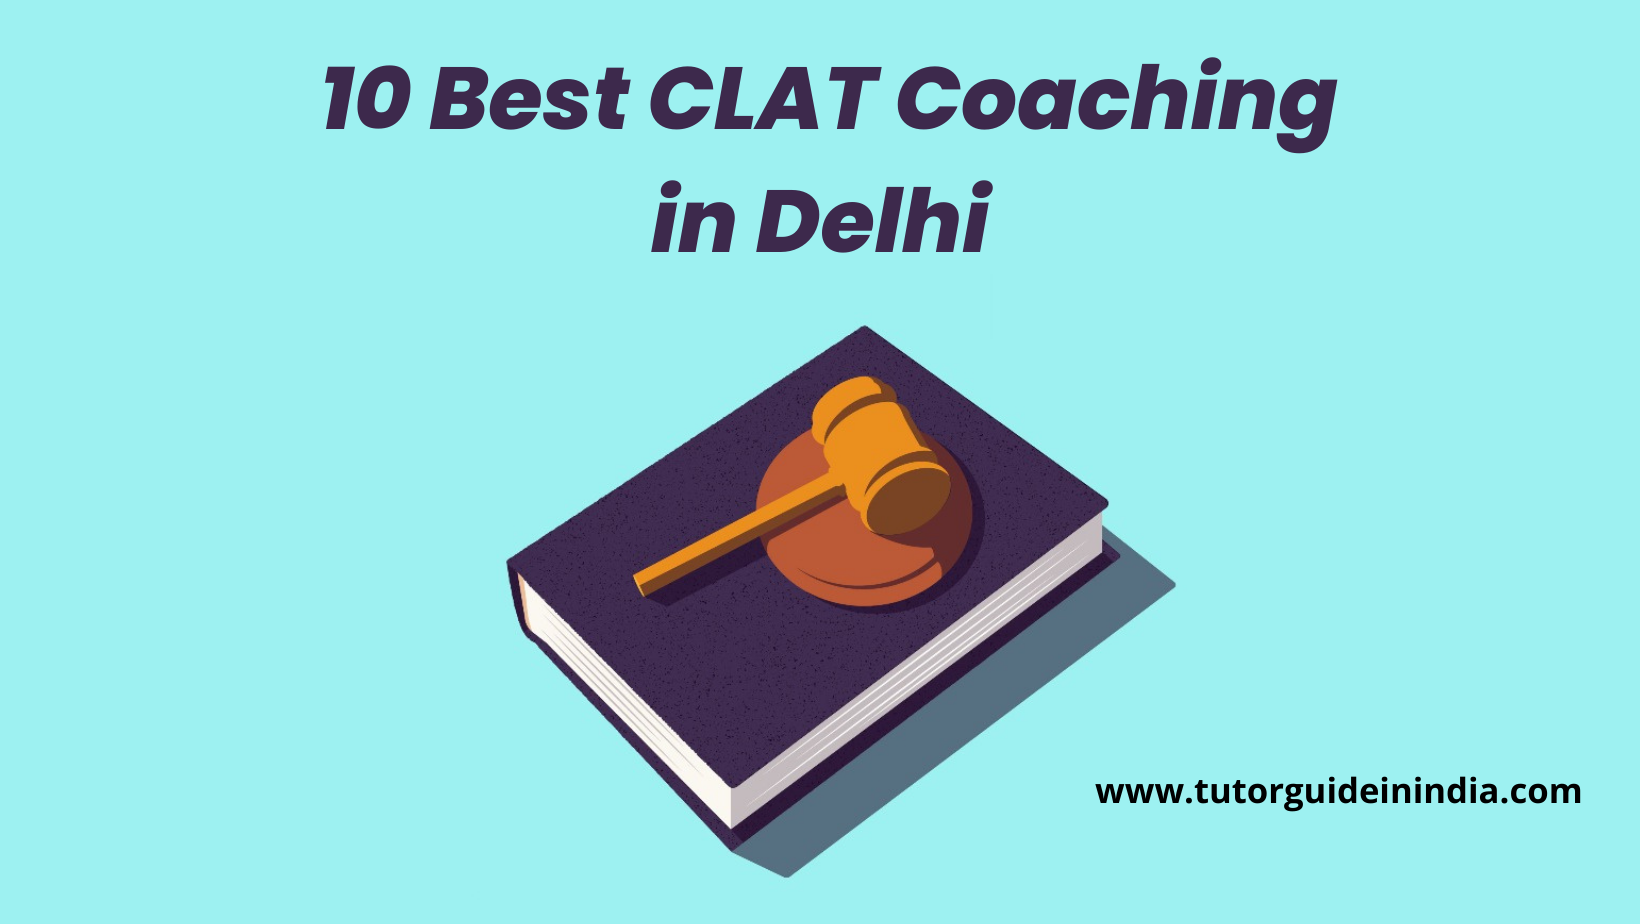 10 best CLAT Coaching In Delhi | Join Best CLAT Coaching centreEducation and LearningCoaching ClassesSouth DelhiHauz Khas